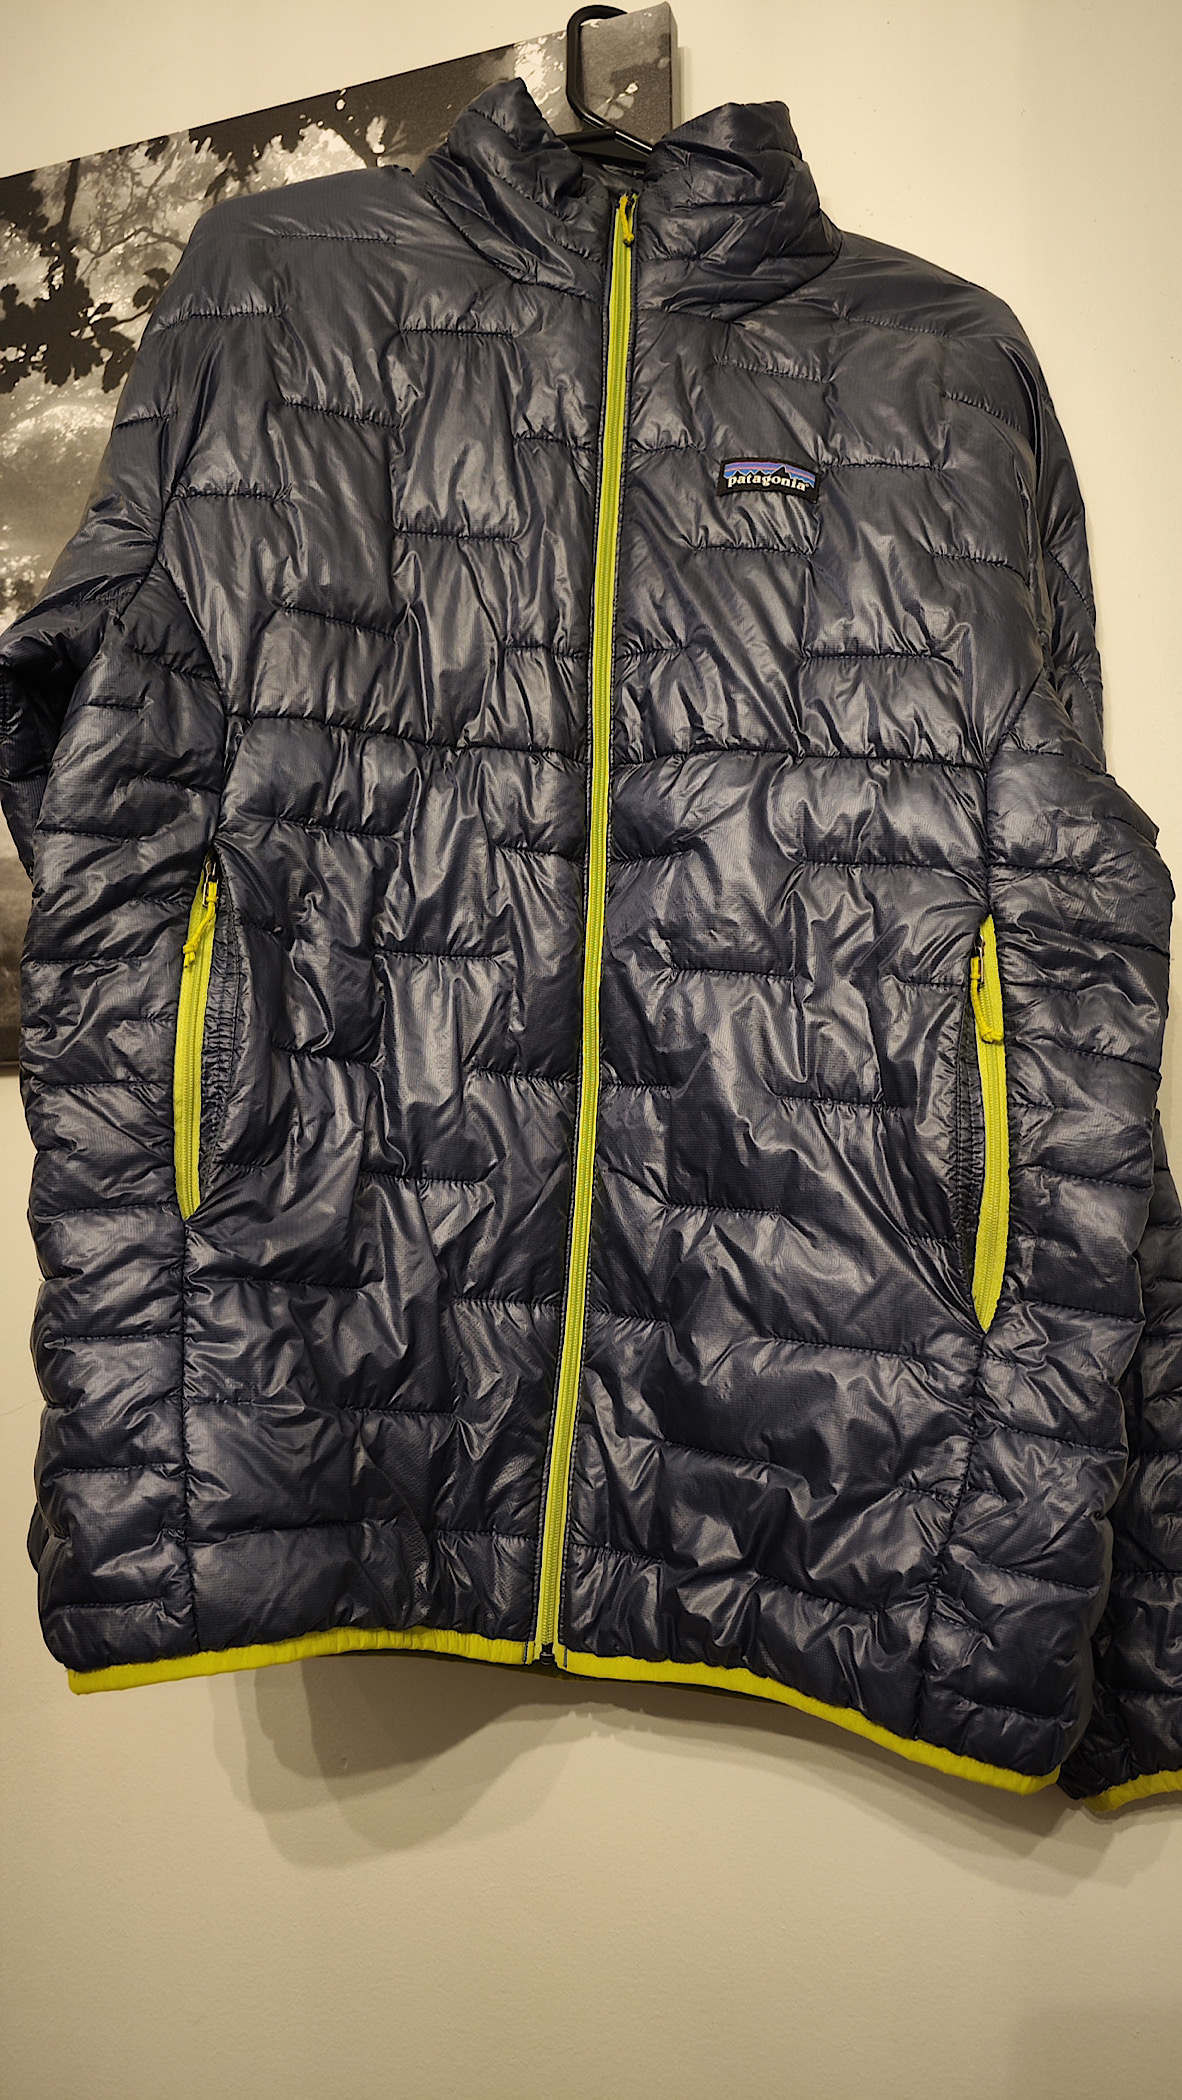 Patagonia Men's Micro Puff Jacket - ultralight windproof insulated jacket |  Seven Horizons | Reviews on Judge.me